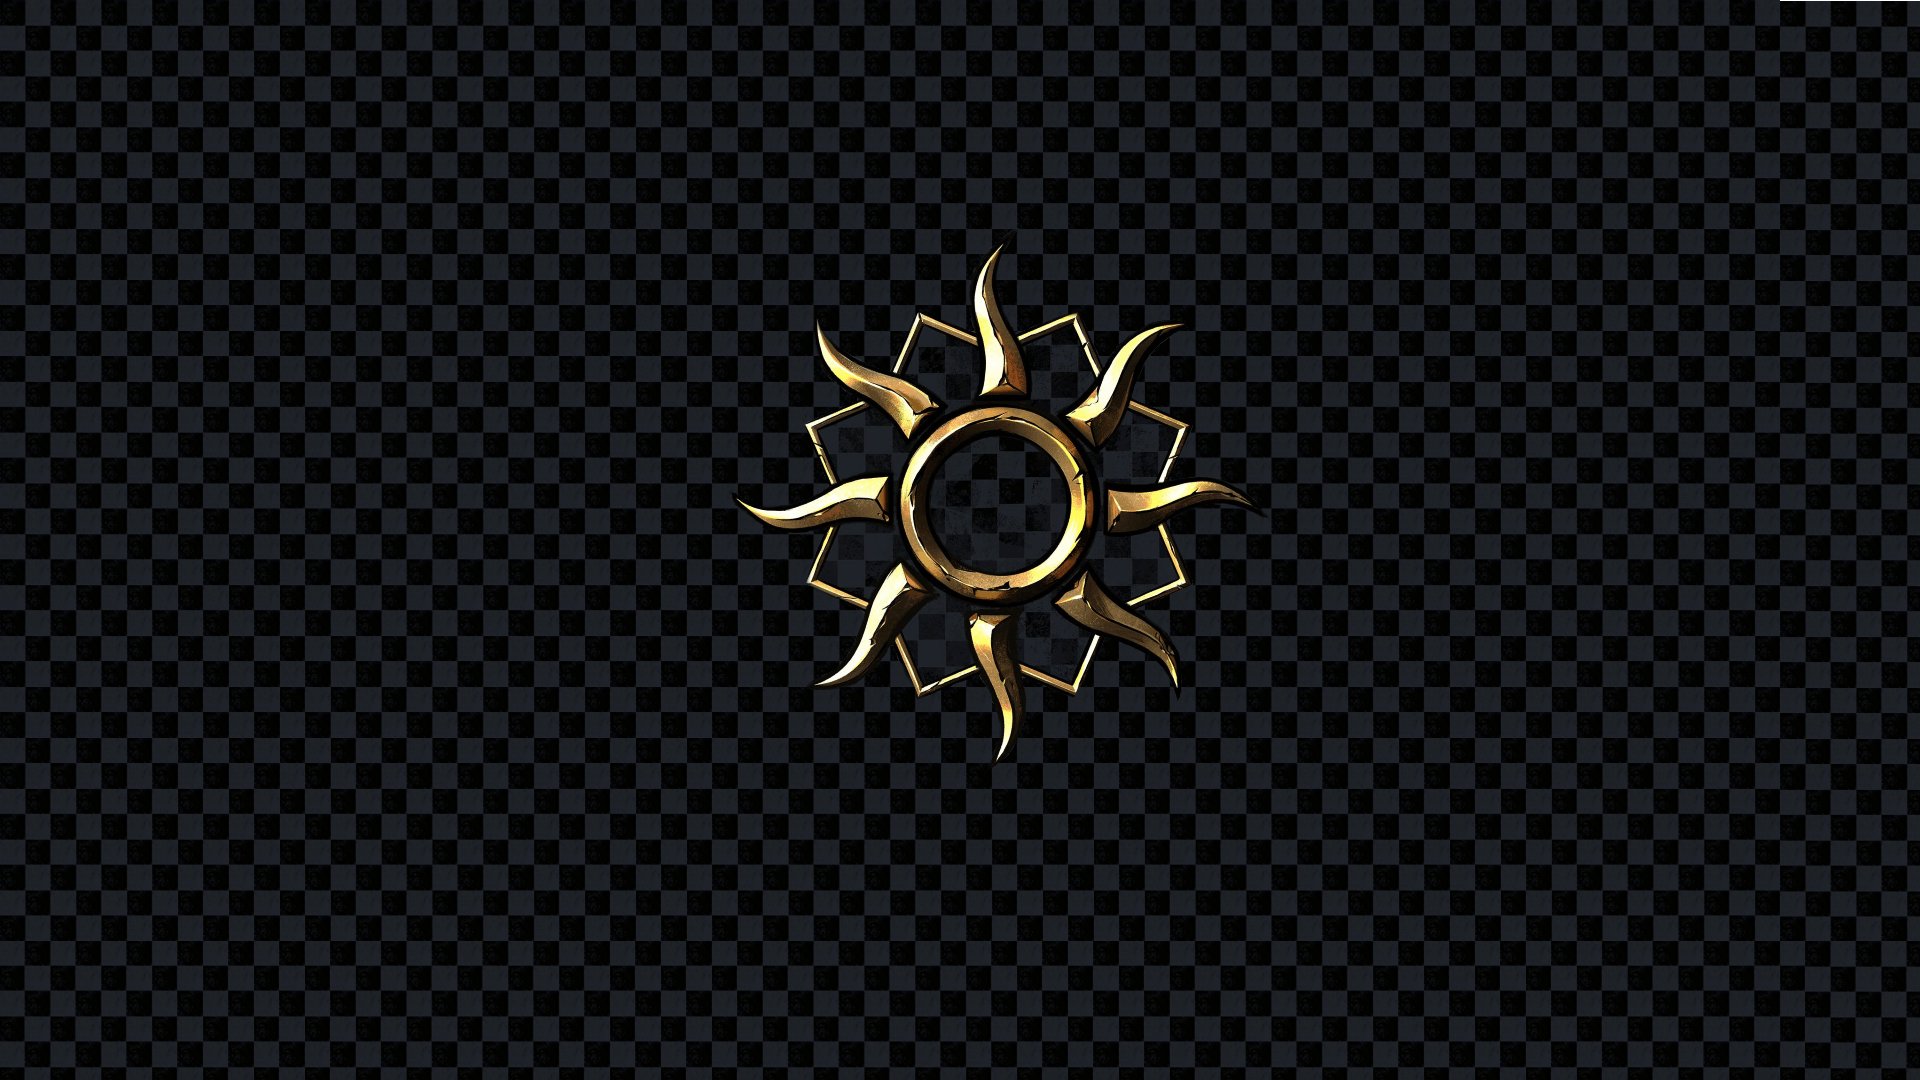 Nilfgaard is awesome and I made a wallpaper featuring their army